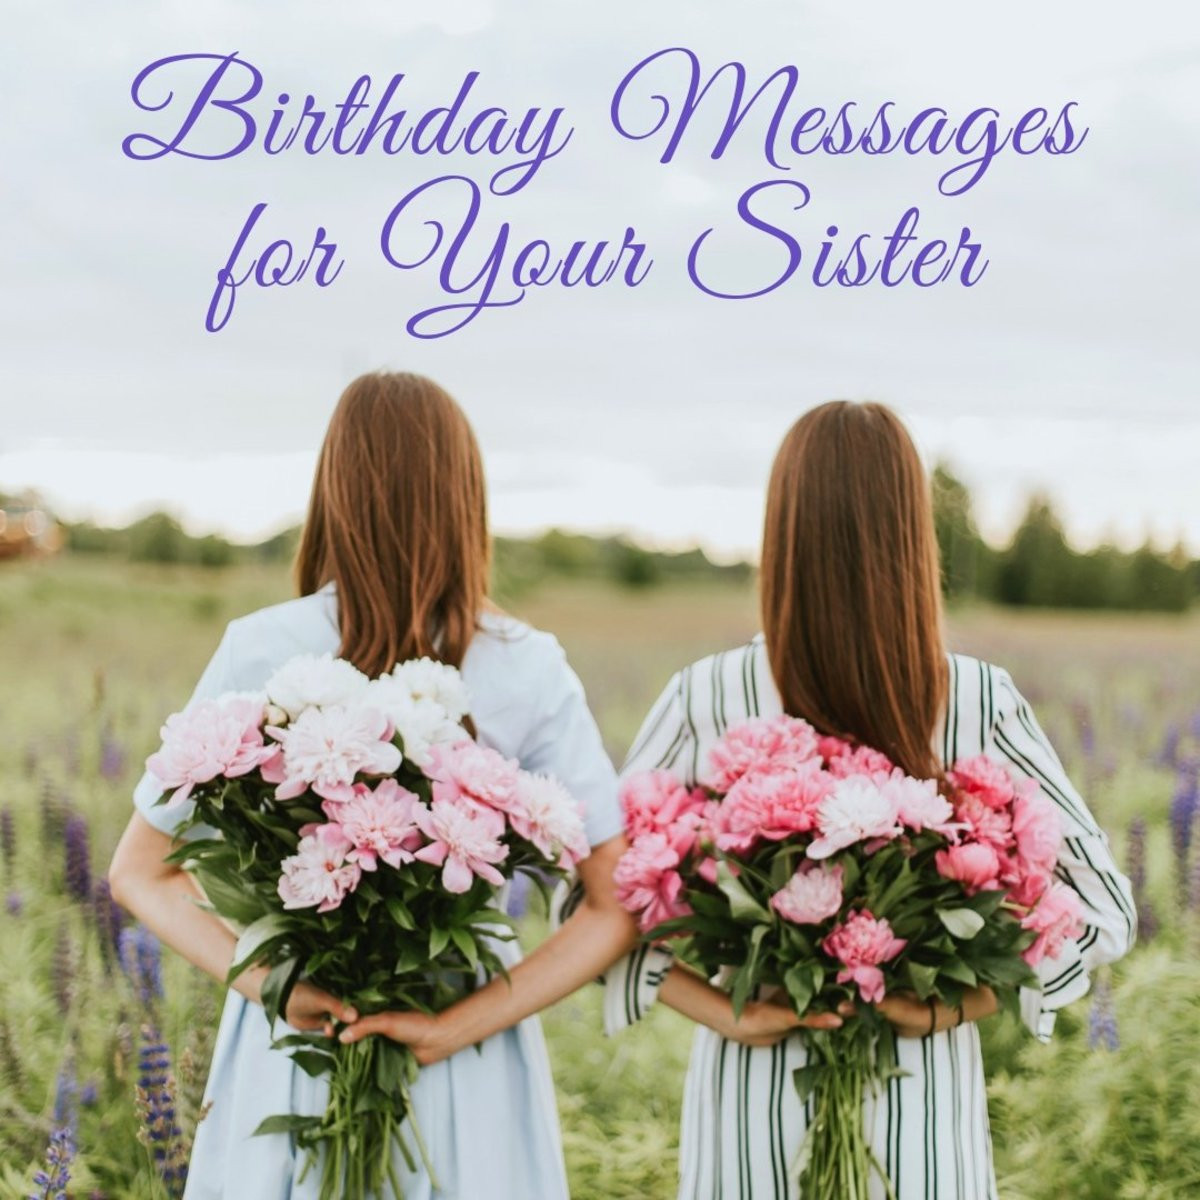 Birthday Wishes Sister
 Birthday Wishes for a Sister Messages and Poems